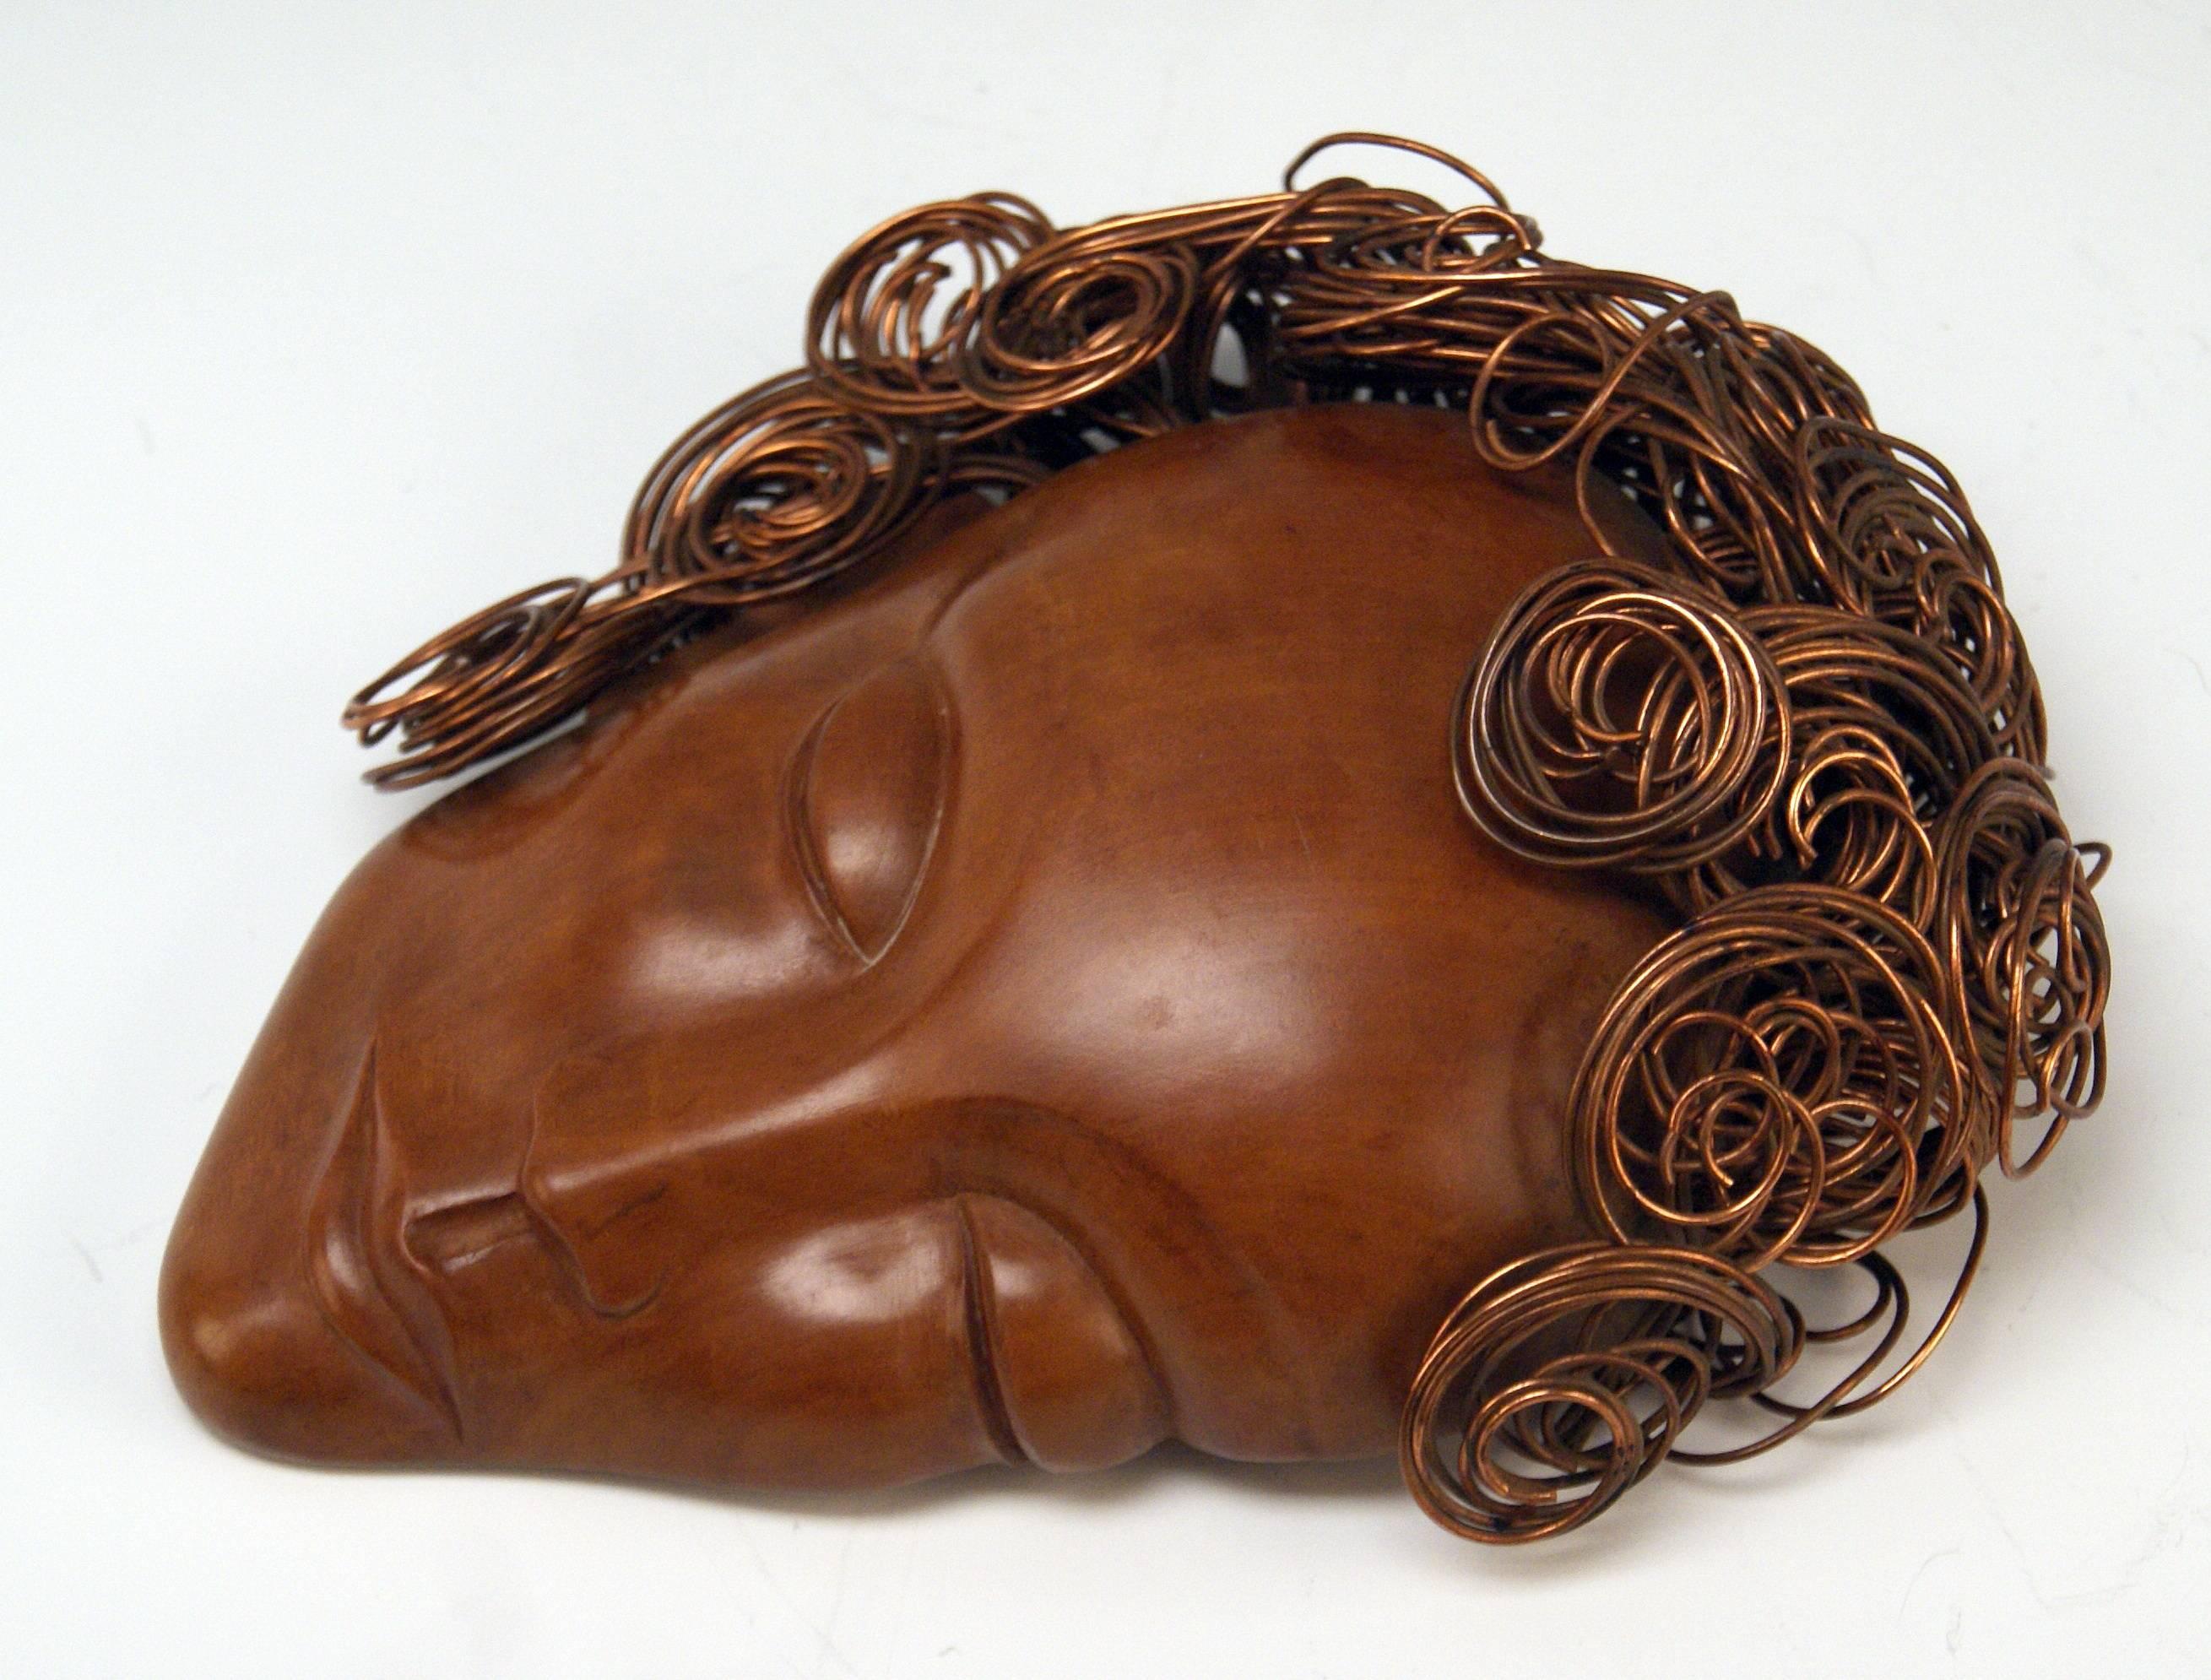 Mid-20th Century Art Deco Wooden Head Lady Curled Copper Hair by Hagenauer Vienna Made 1935-1940